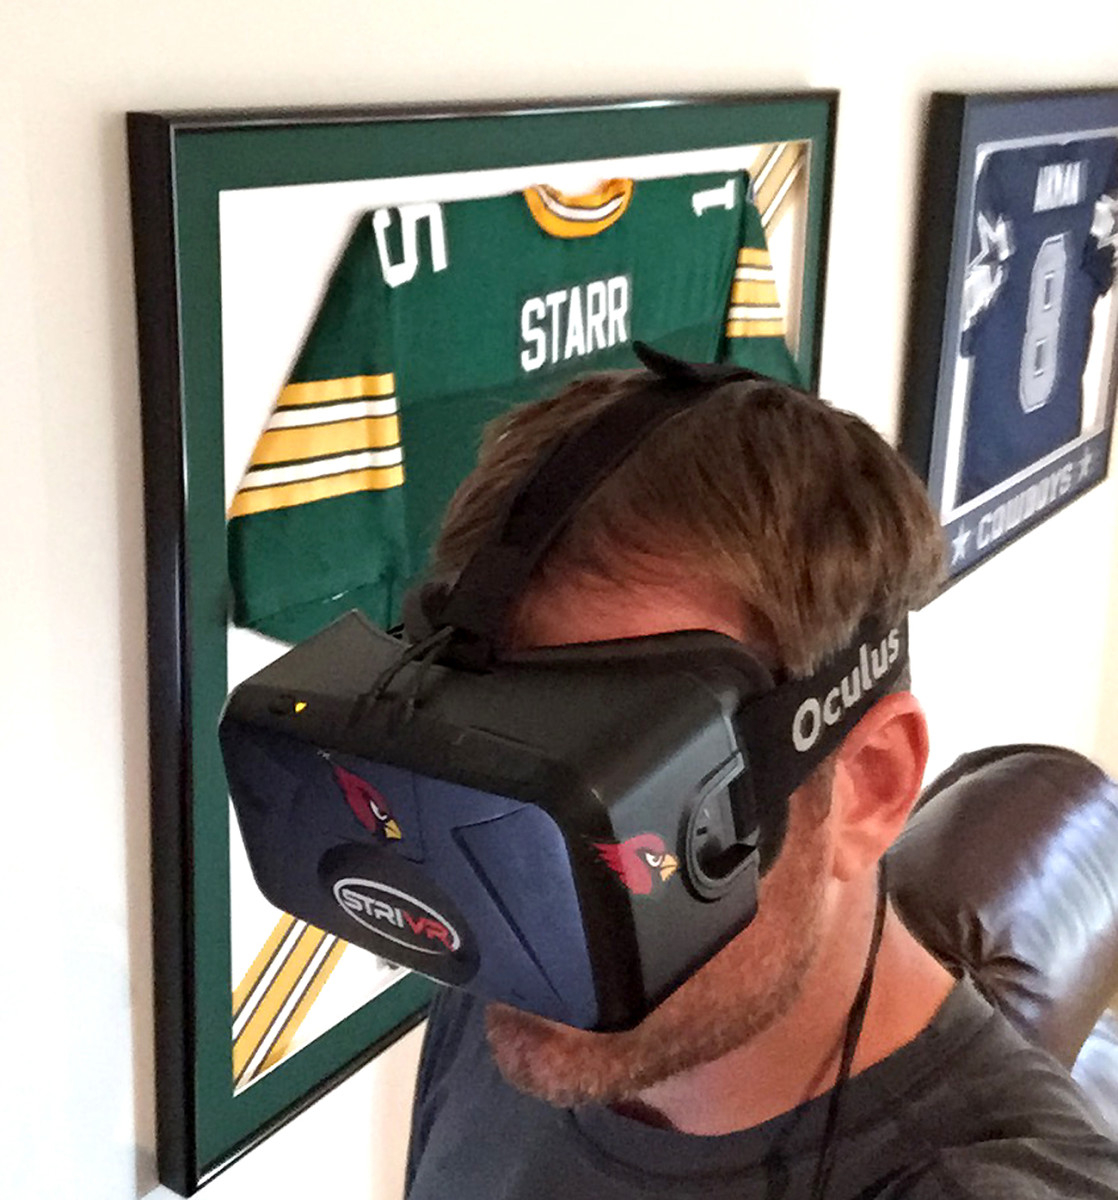 “I don’t buy in to all the new technology, but I am all in on this.” Palmer with the STRIVR virtual reality headset.